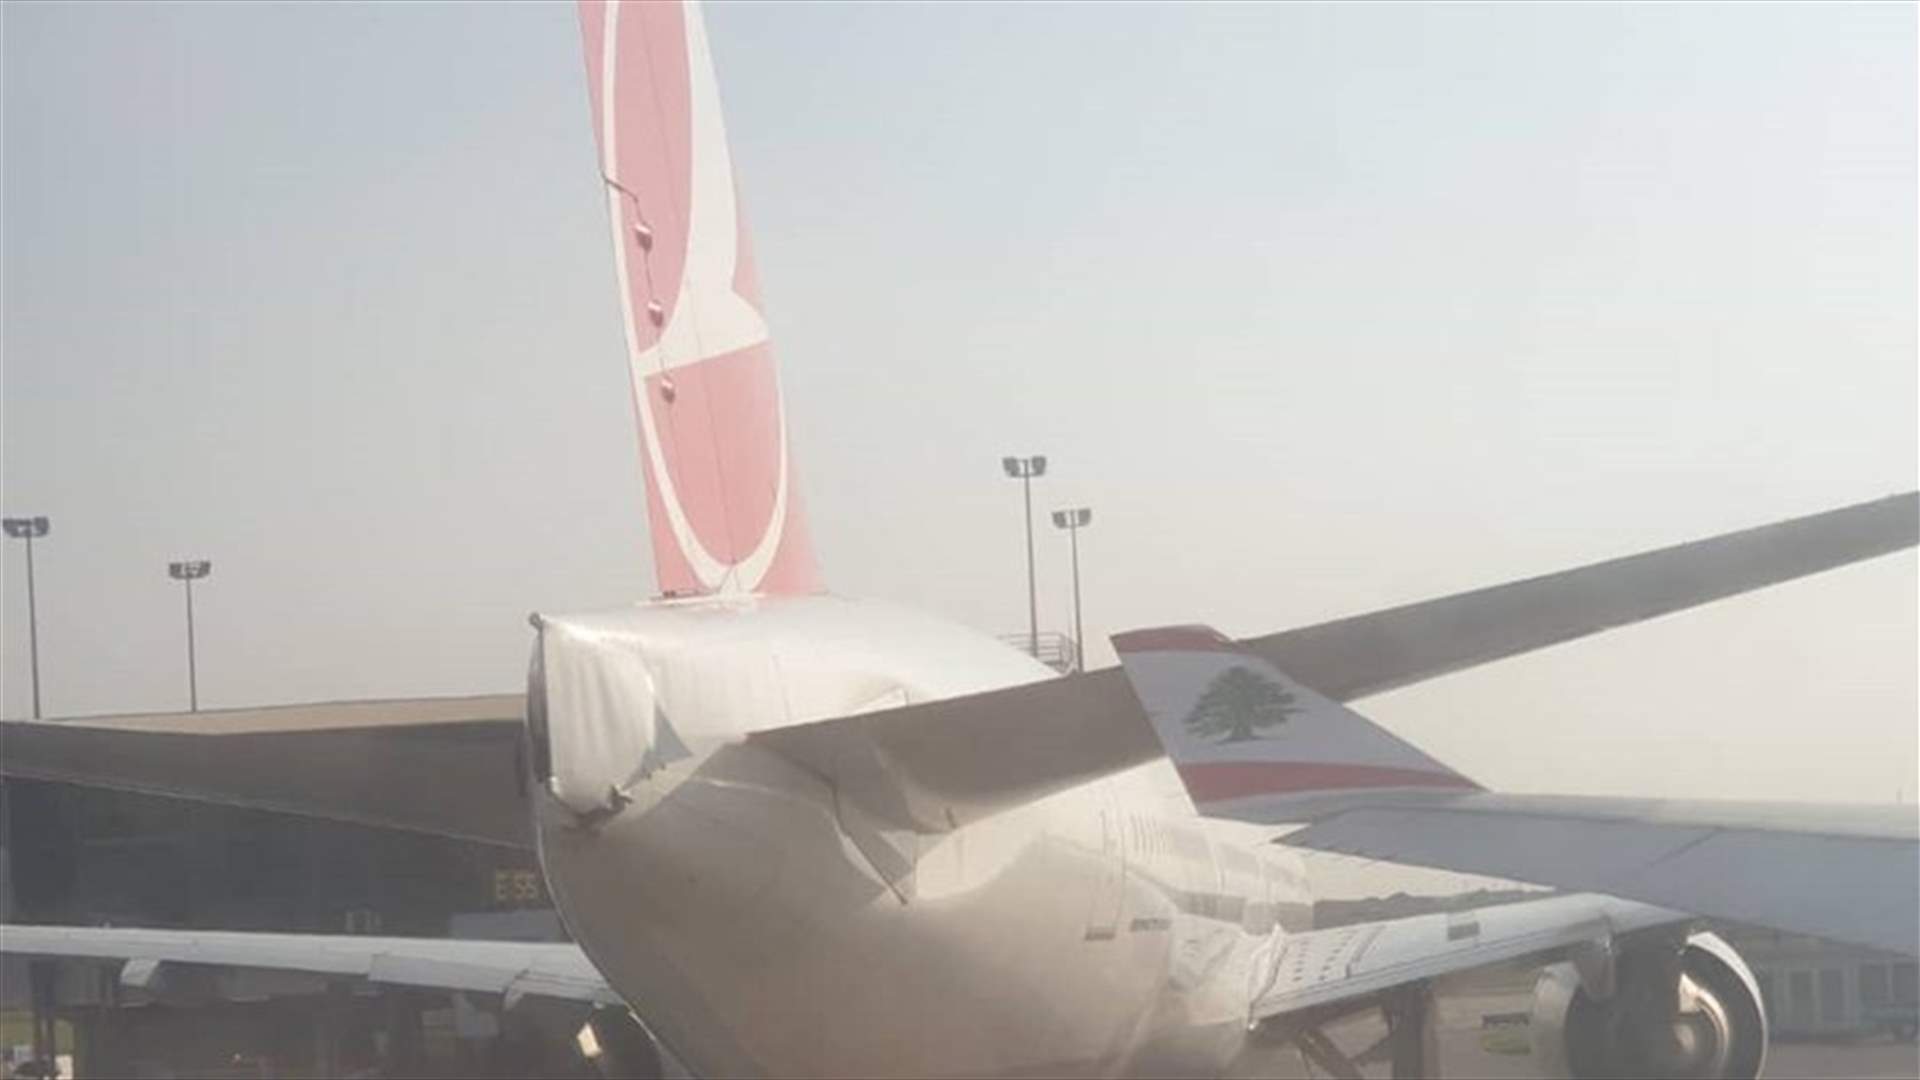 MEA airplane collides with Turkish Airlines airplane at Lagos airport-[PHOTOS]